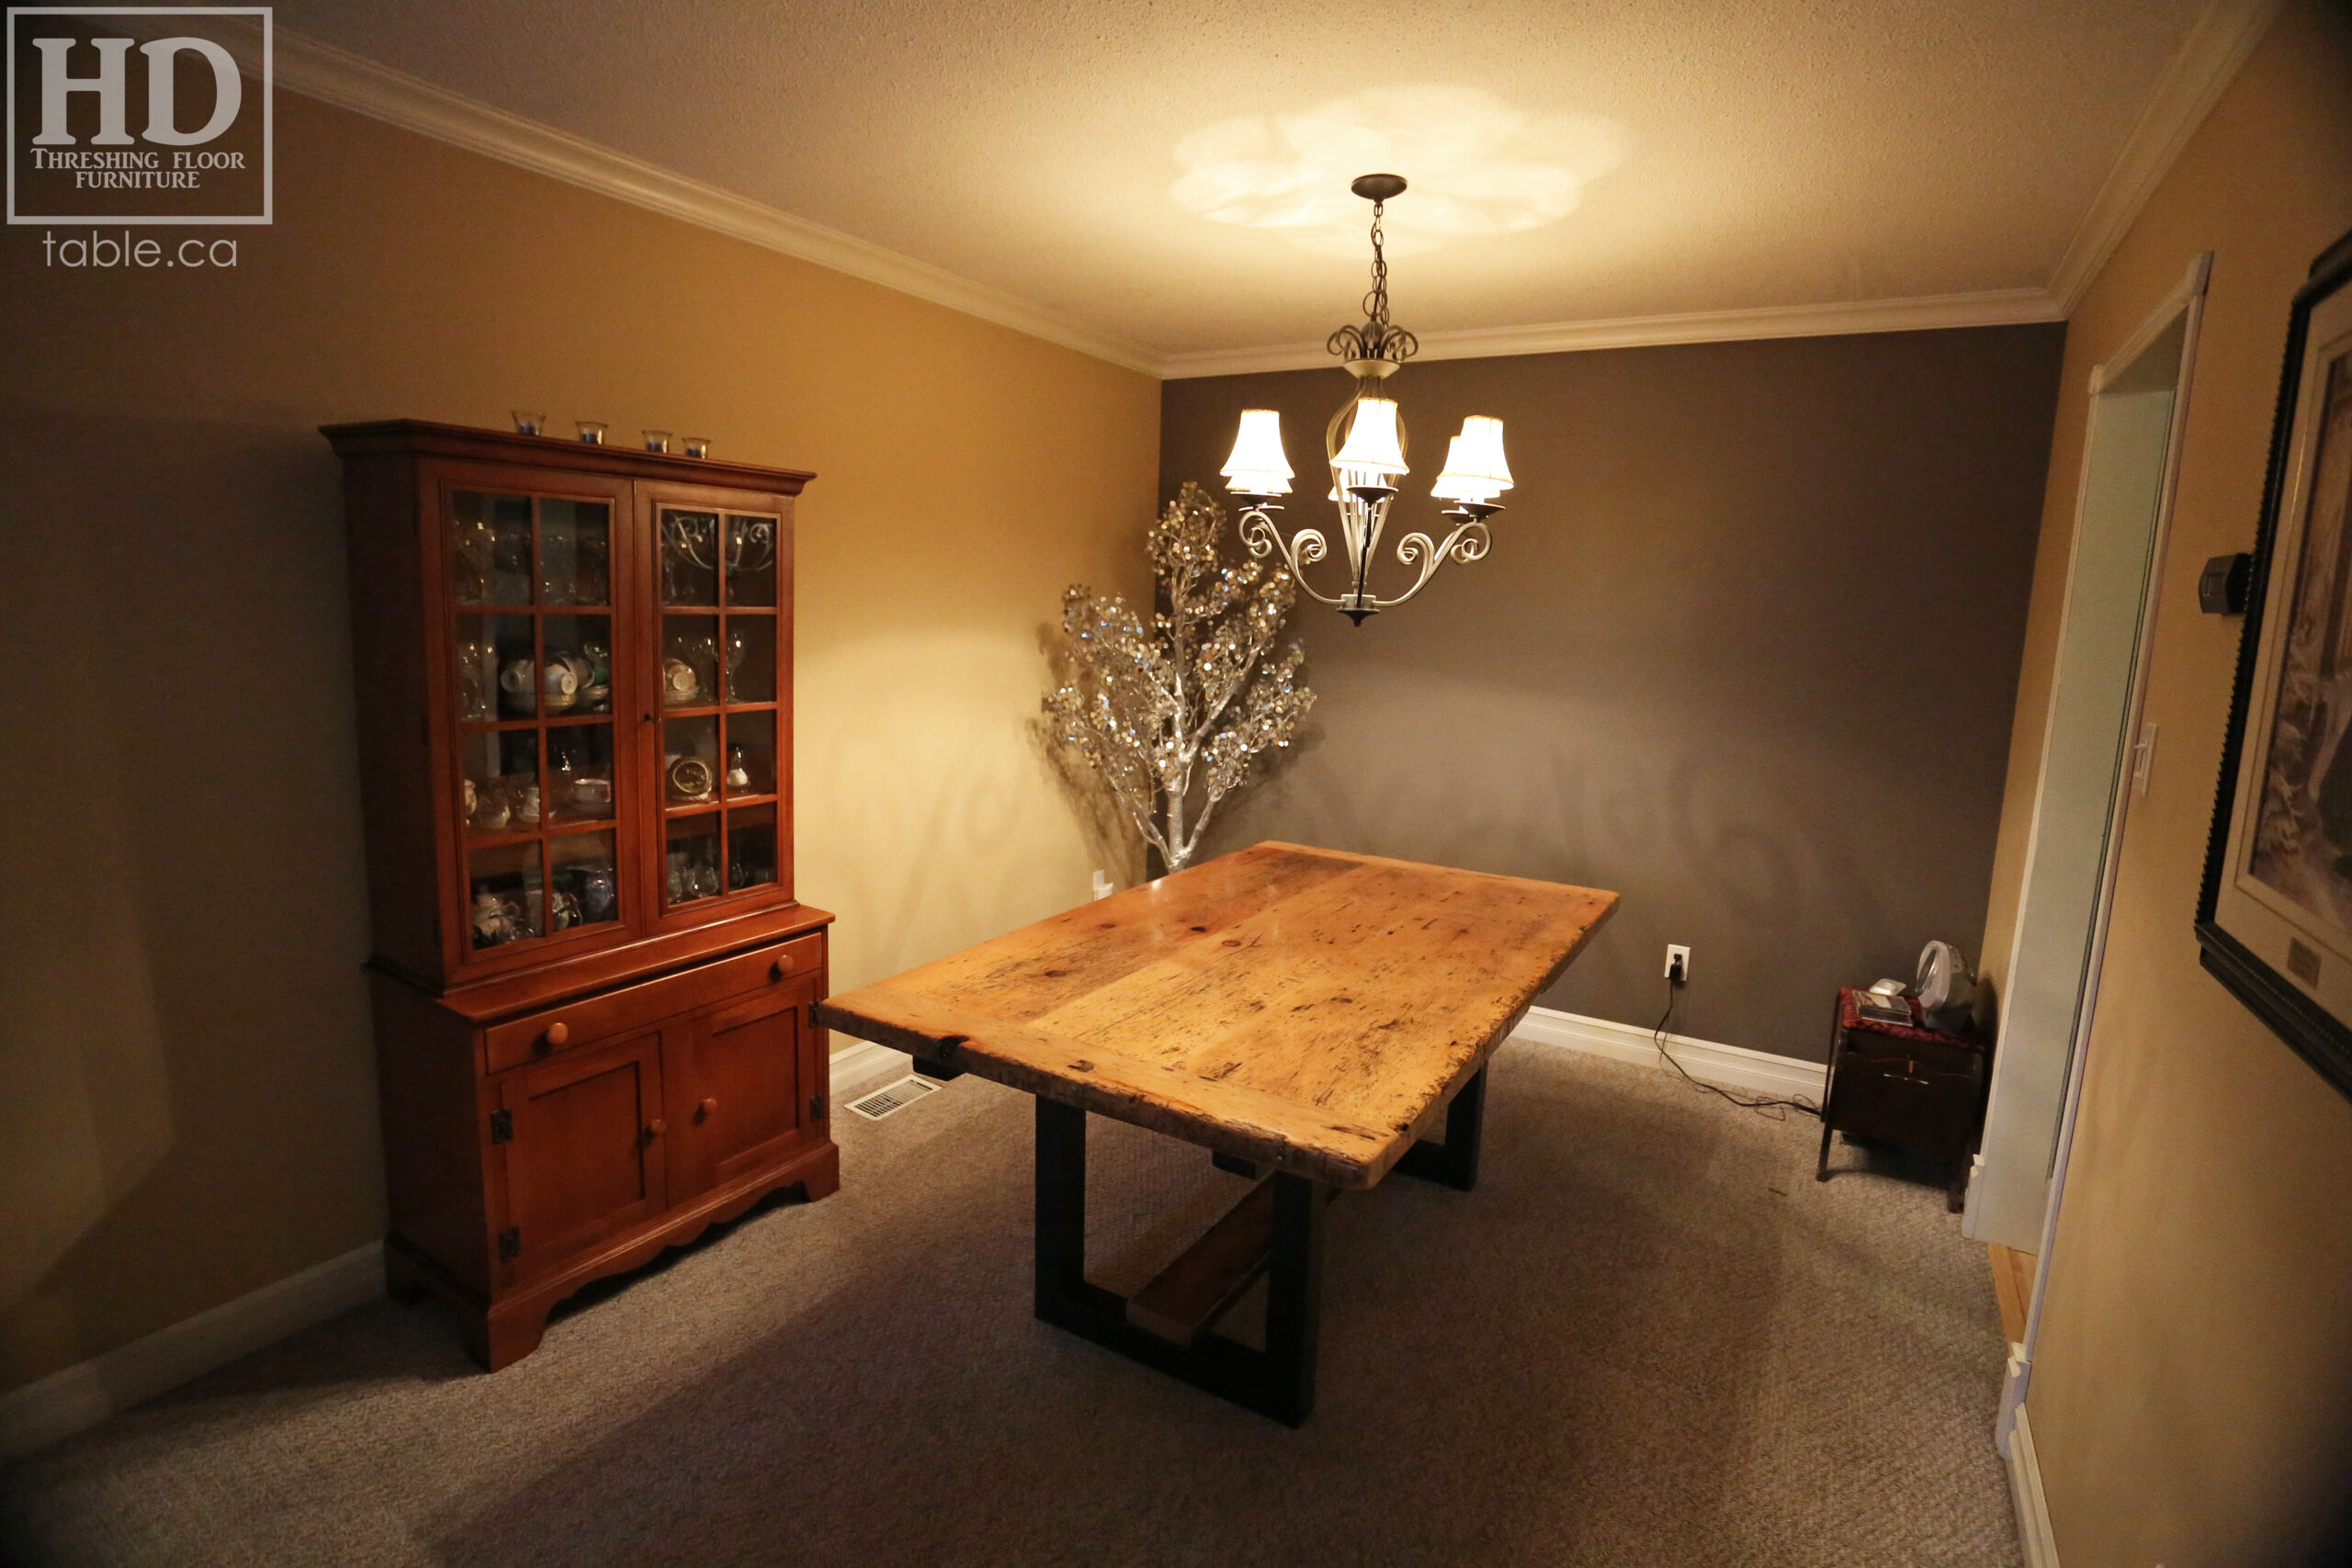 Light Reclaimed Wood Table made from Ontario Barnwood with Metal Base by HD Threshing Floor Furniture / www.table.ca